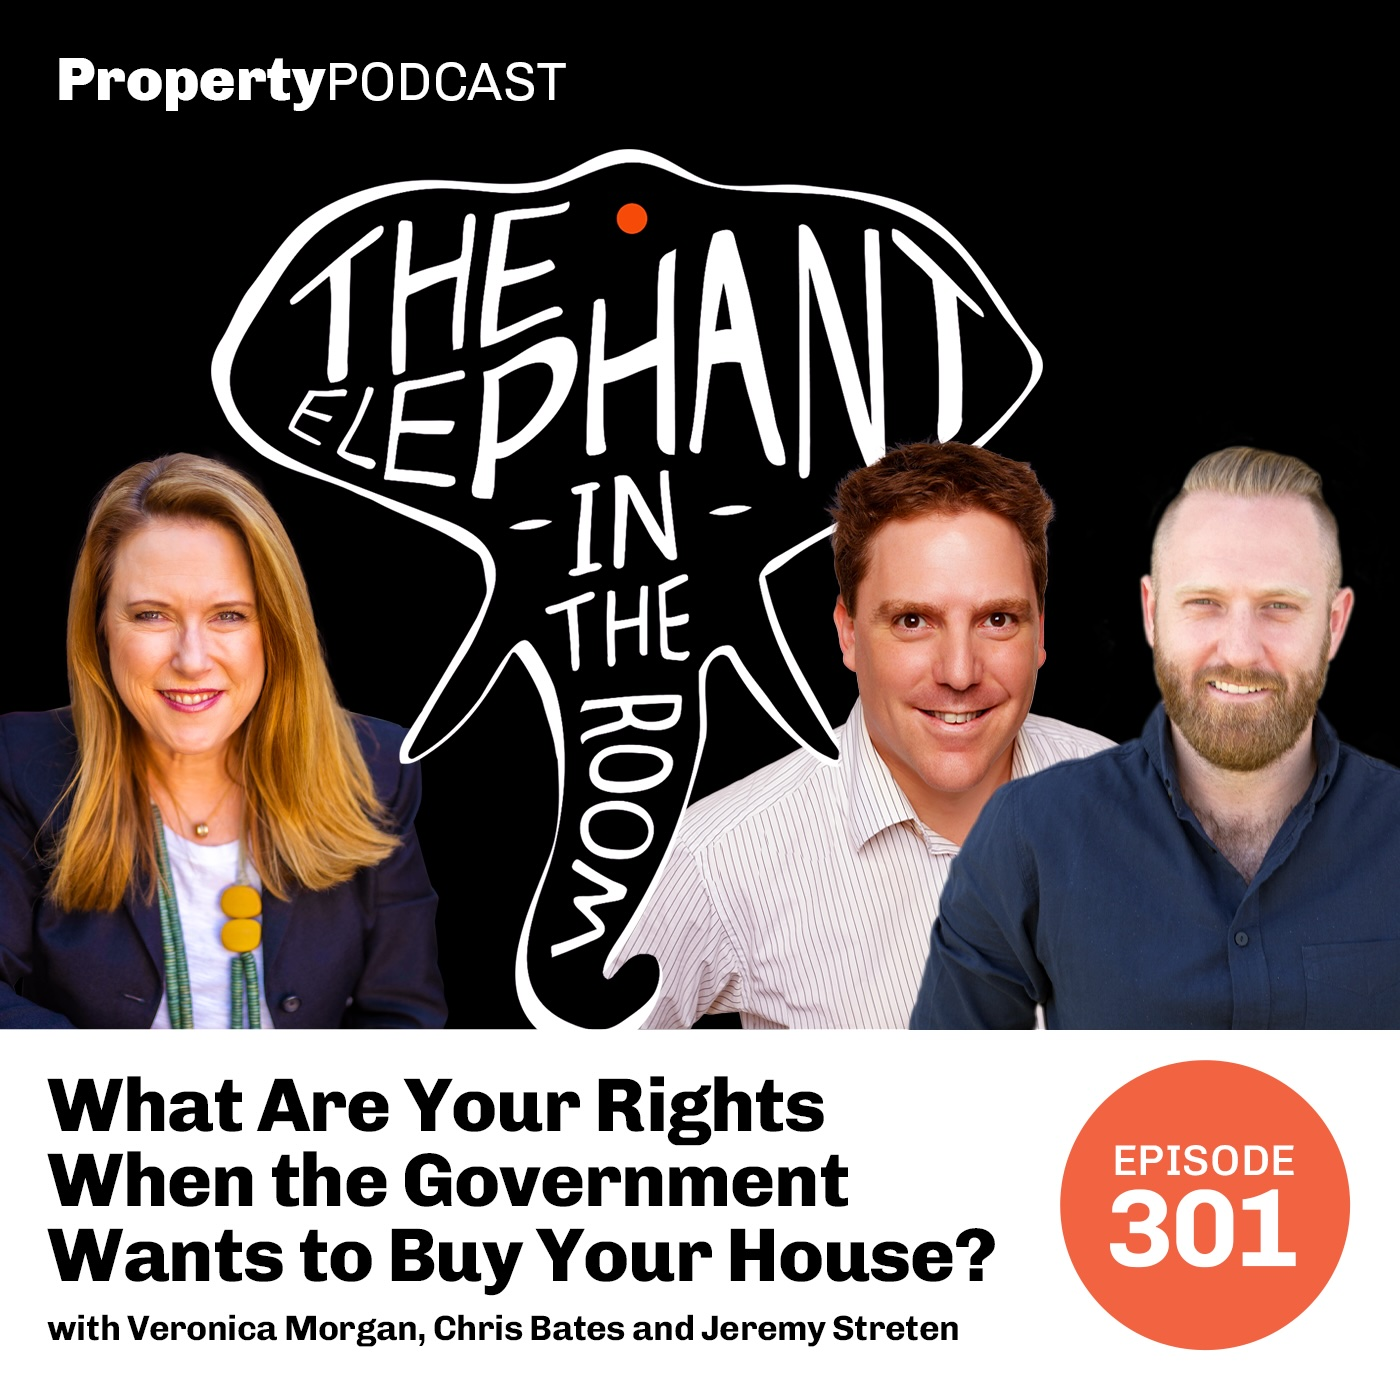 What Are Your Rights When the Government Wants to Buy Your House?